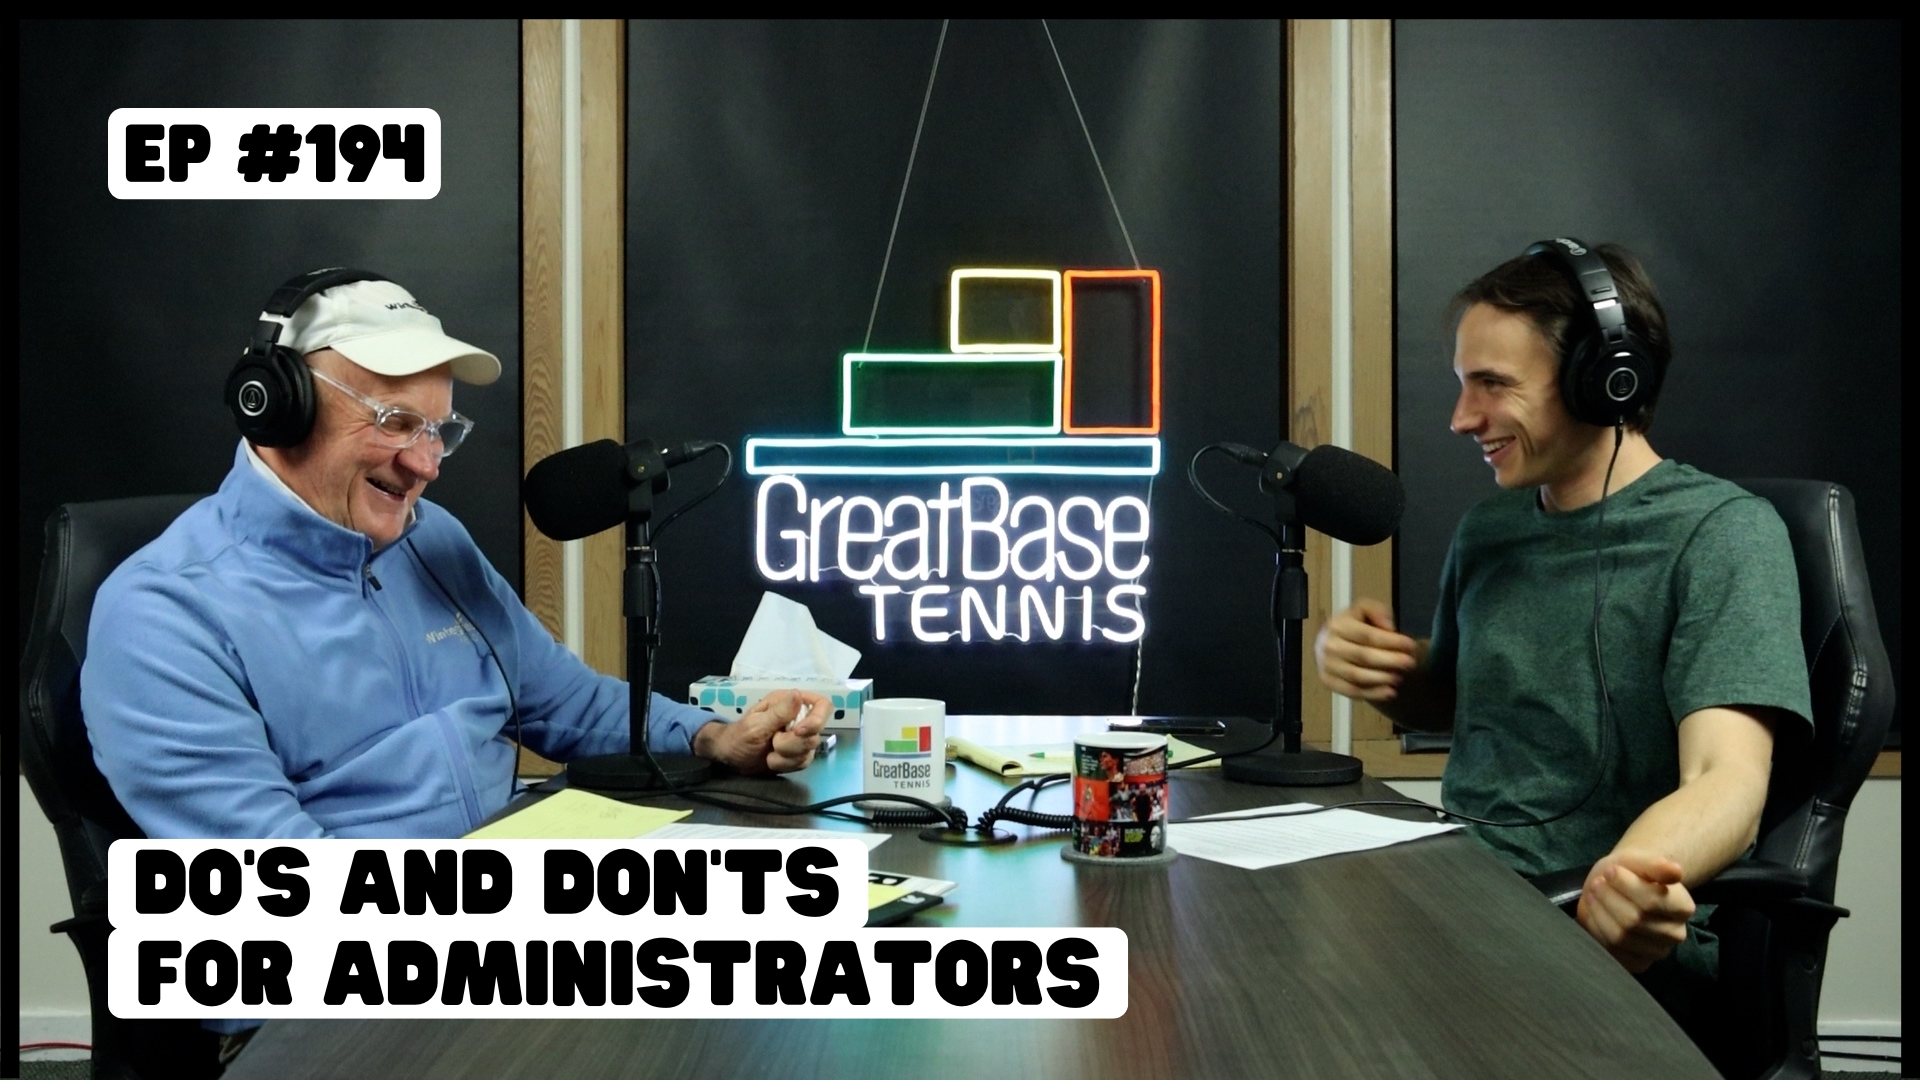 The GreatBase Tennis Podcast Episode 194 - Do's and Don'ts for Administrators